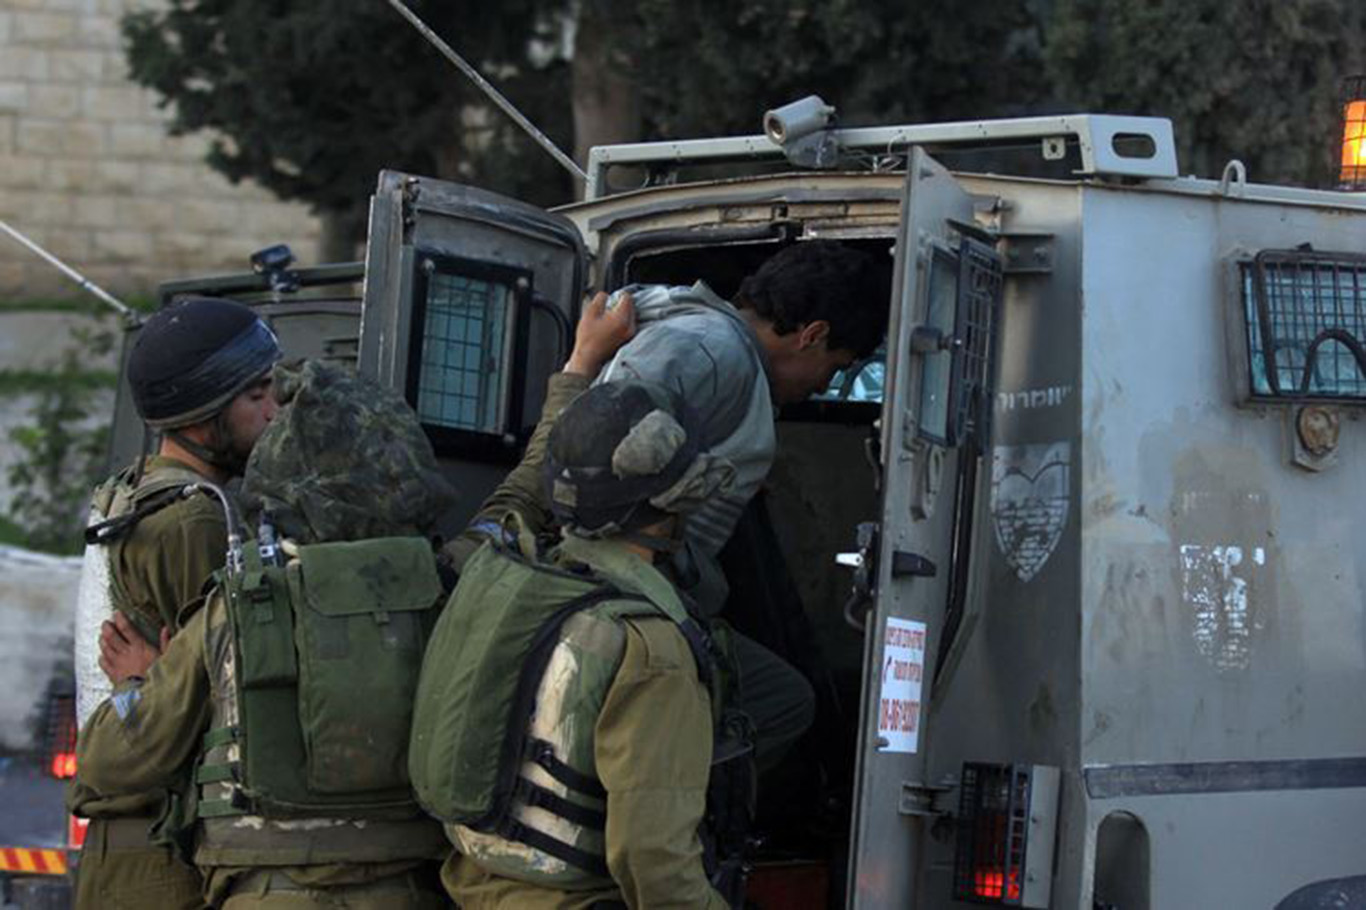 Zionist forces kidnap 5 Palestinians during raids on homes